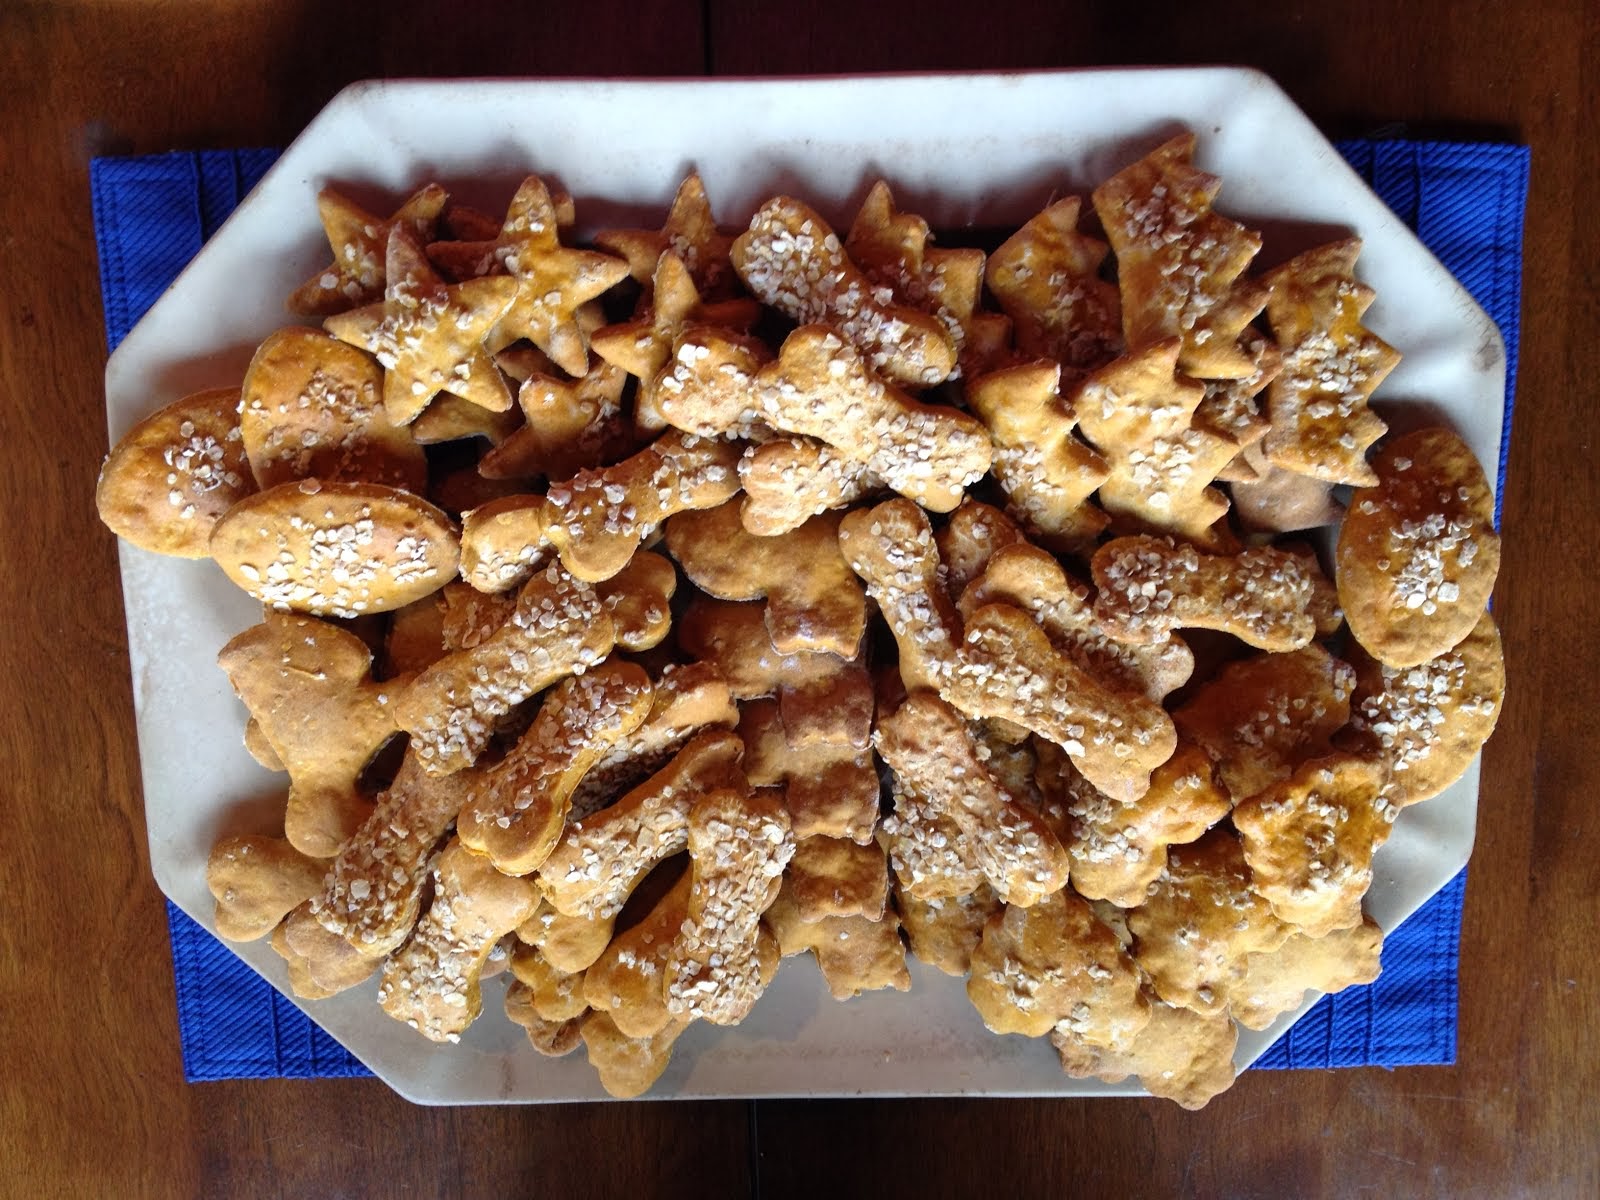 "Woofford Rewards" Dog Treats! Baked with love in Woodford County with All Natural Ingredients